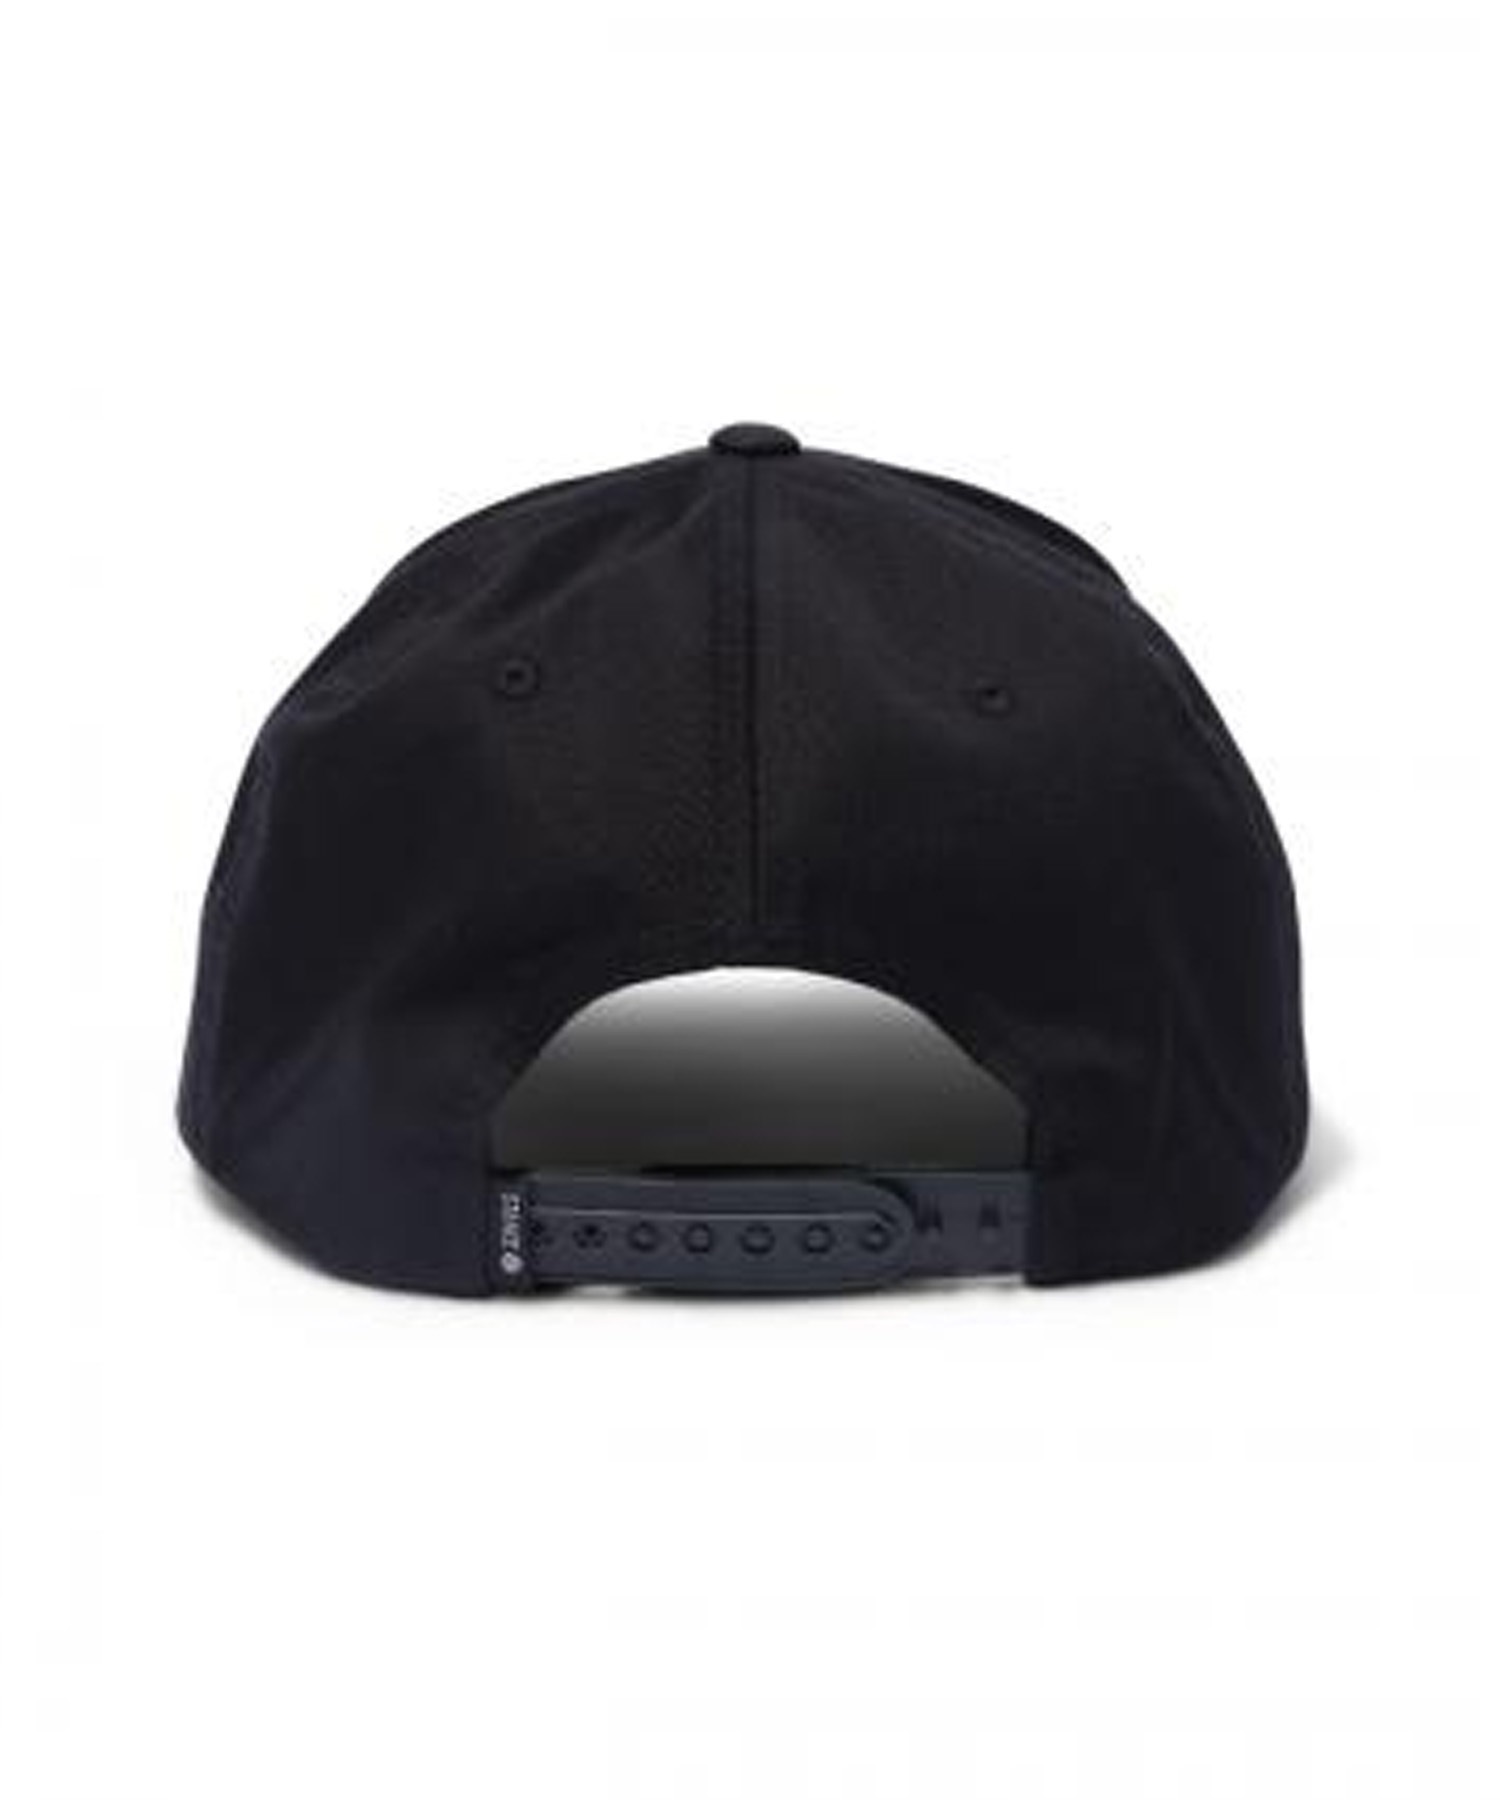 STANCE/スタンス キャップ ICON SNAPBACK HAT A304D21ICO(BLACK-FREE)